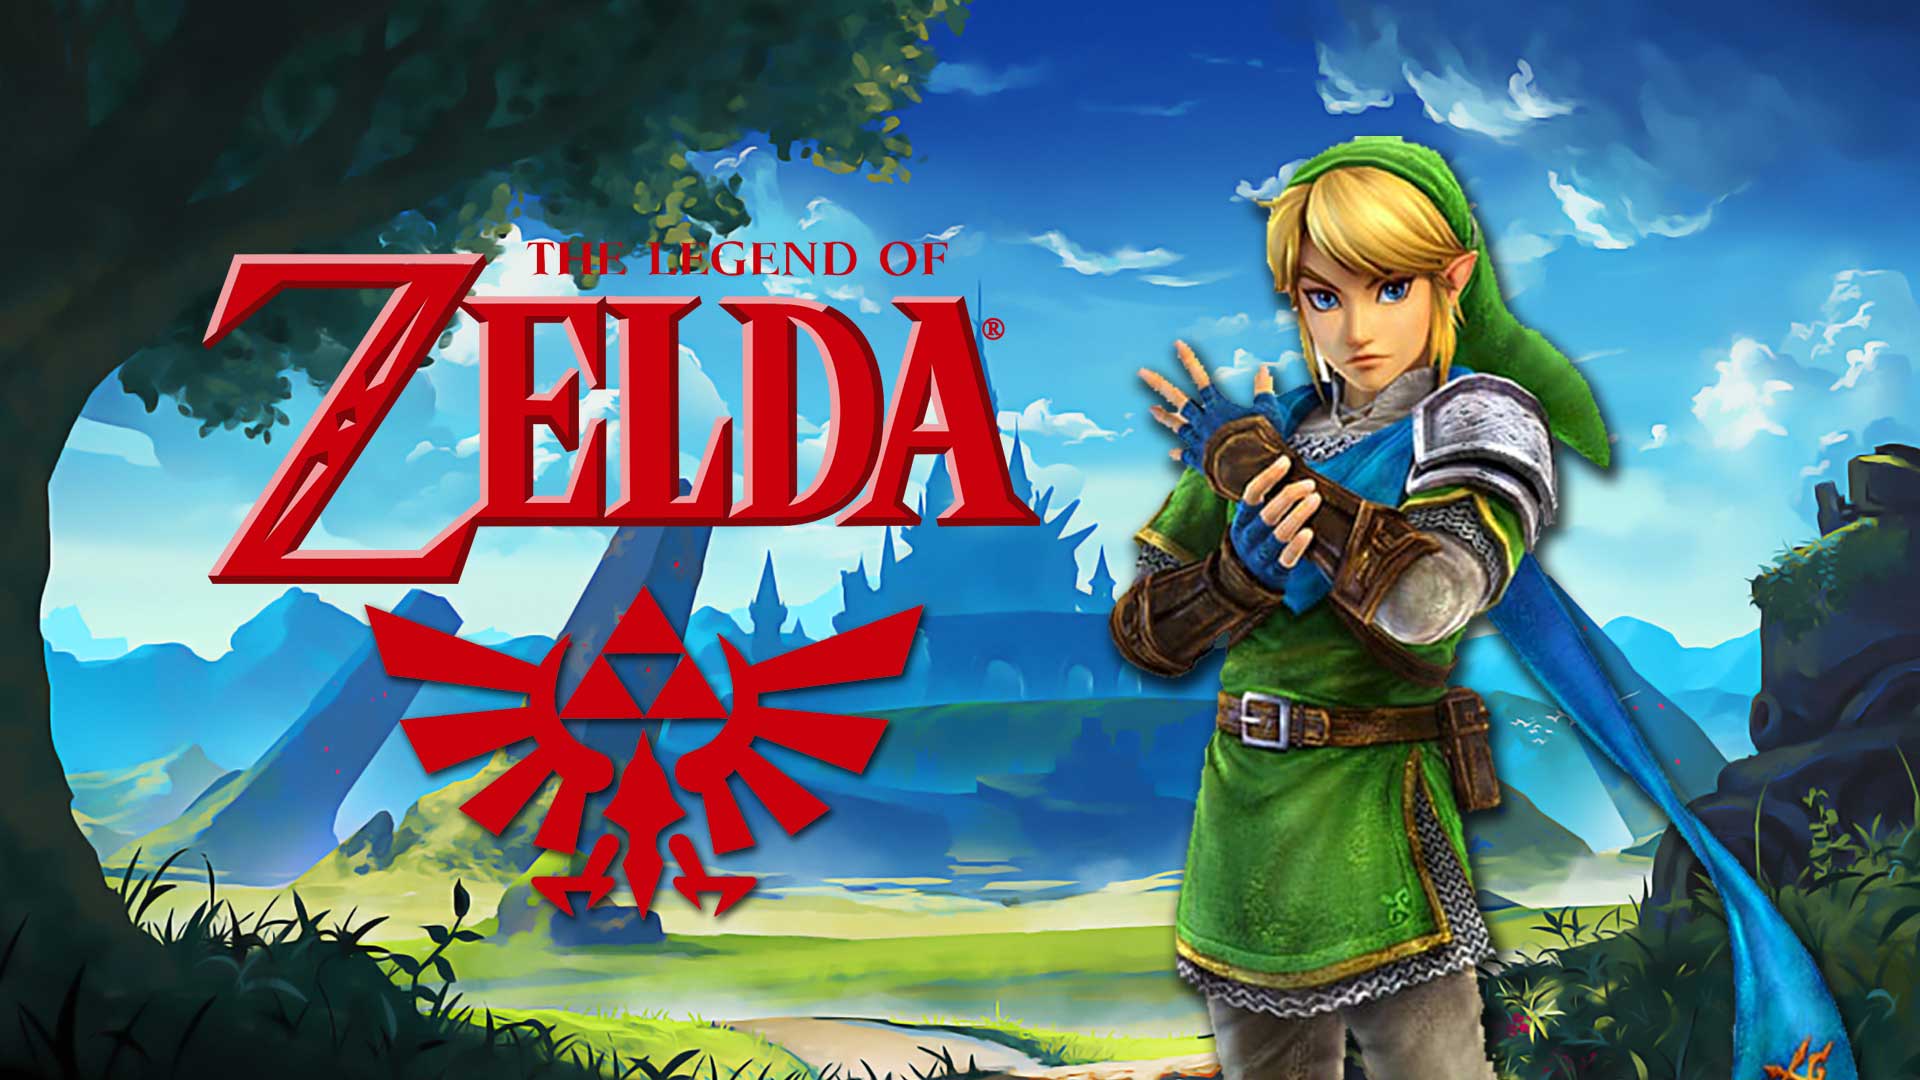 The Legend Of Zelda Wallpapers Hd New Tab Themes Backgrounds